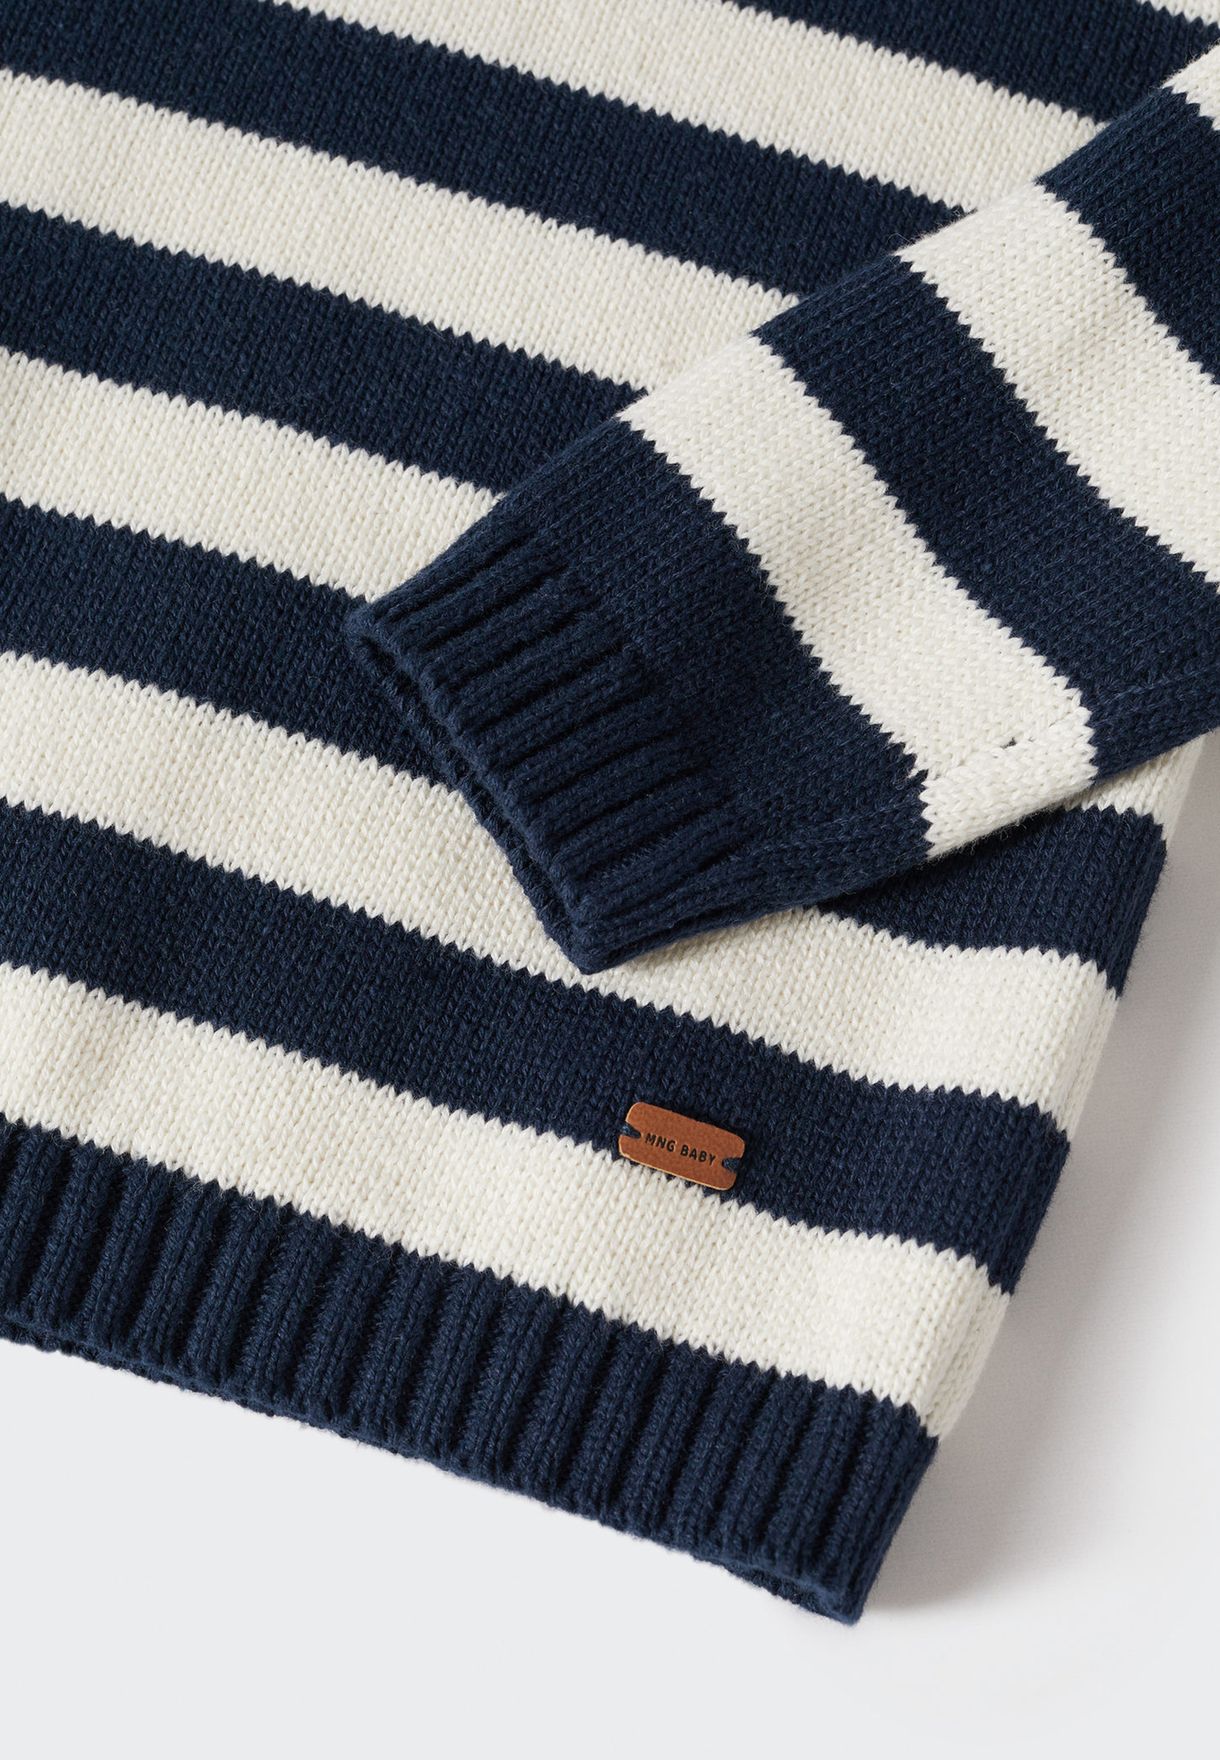 Infant Striped Knitted Sweater